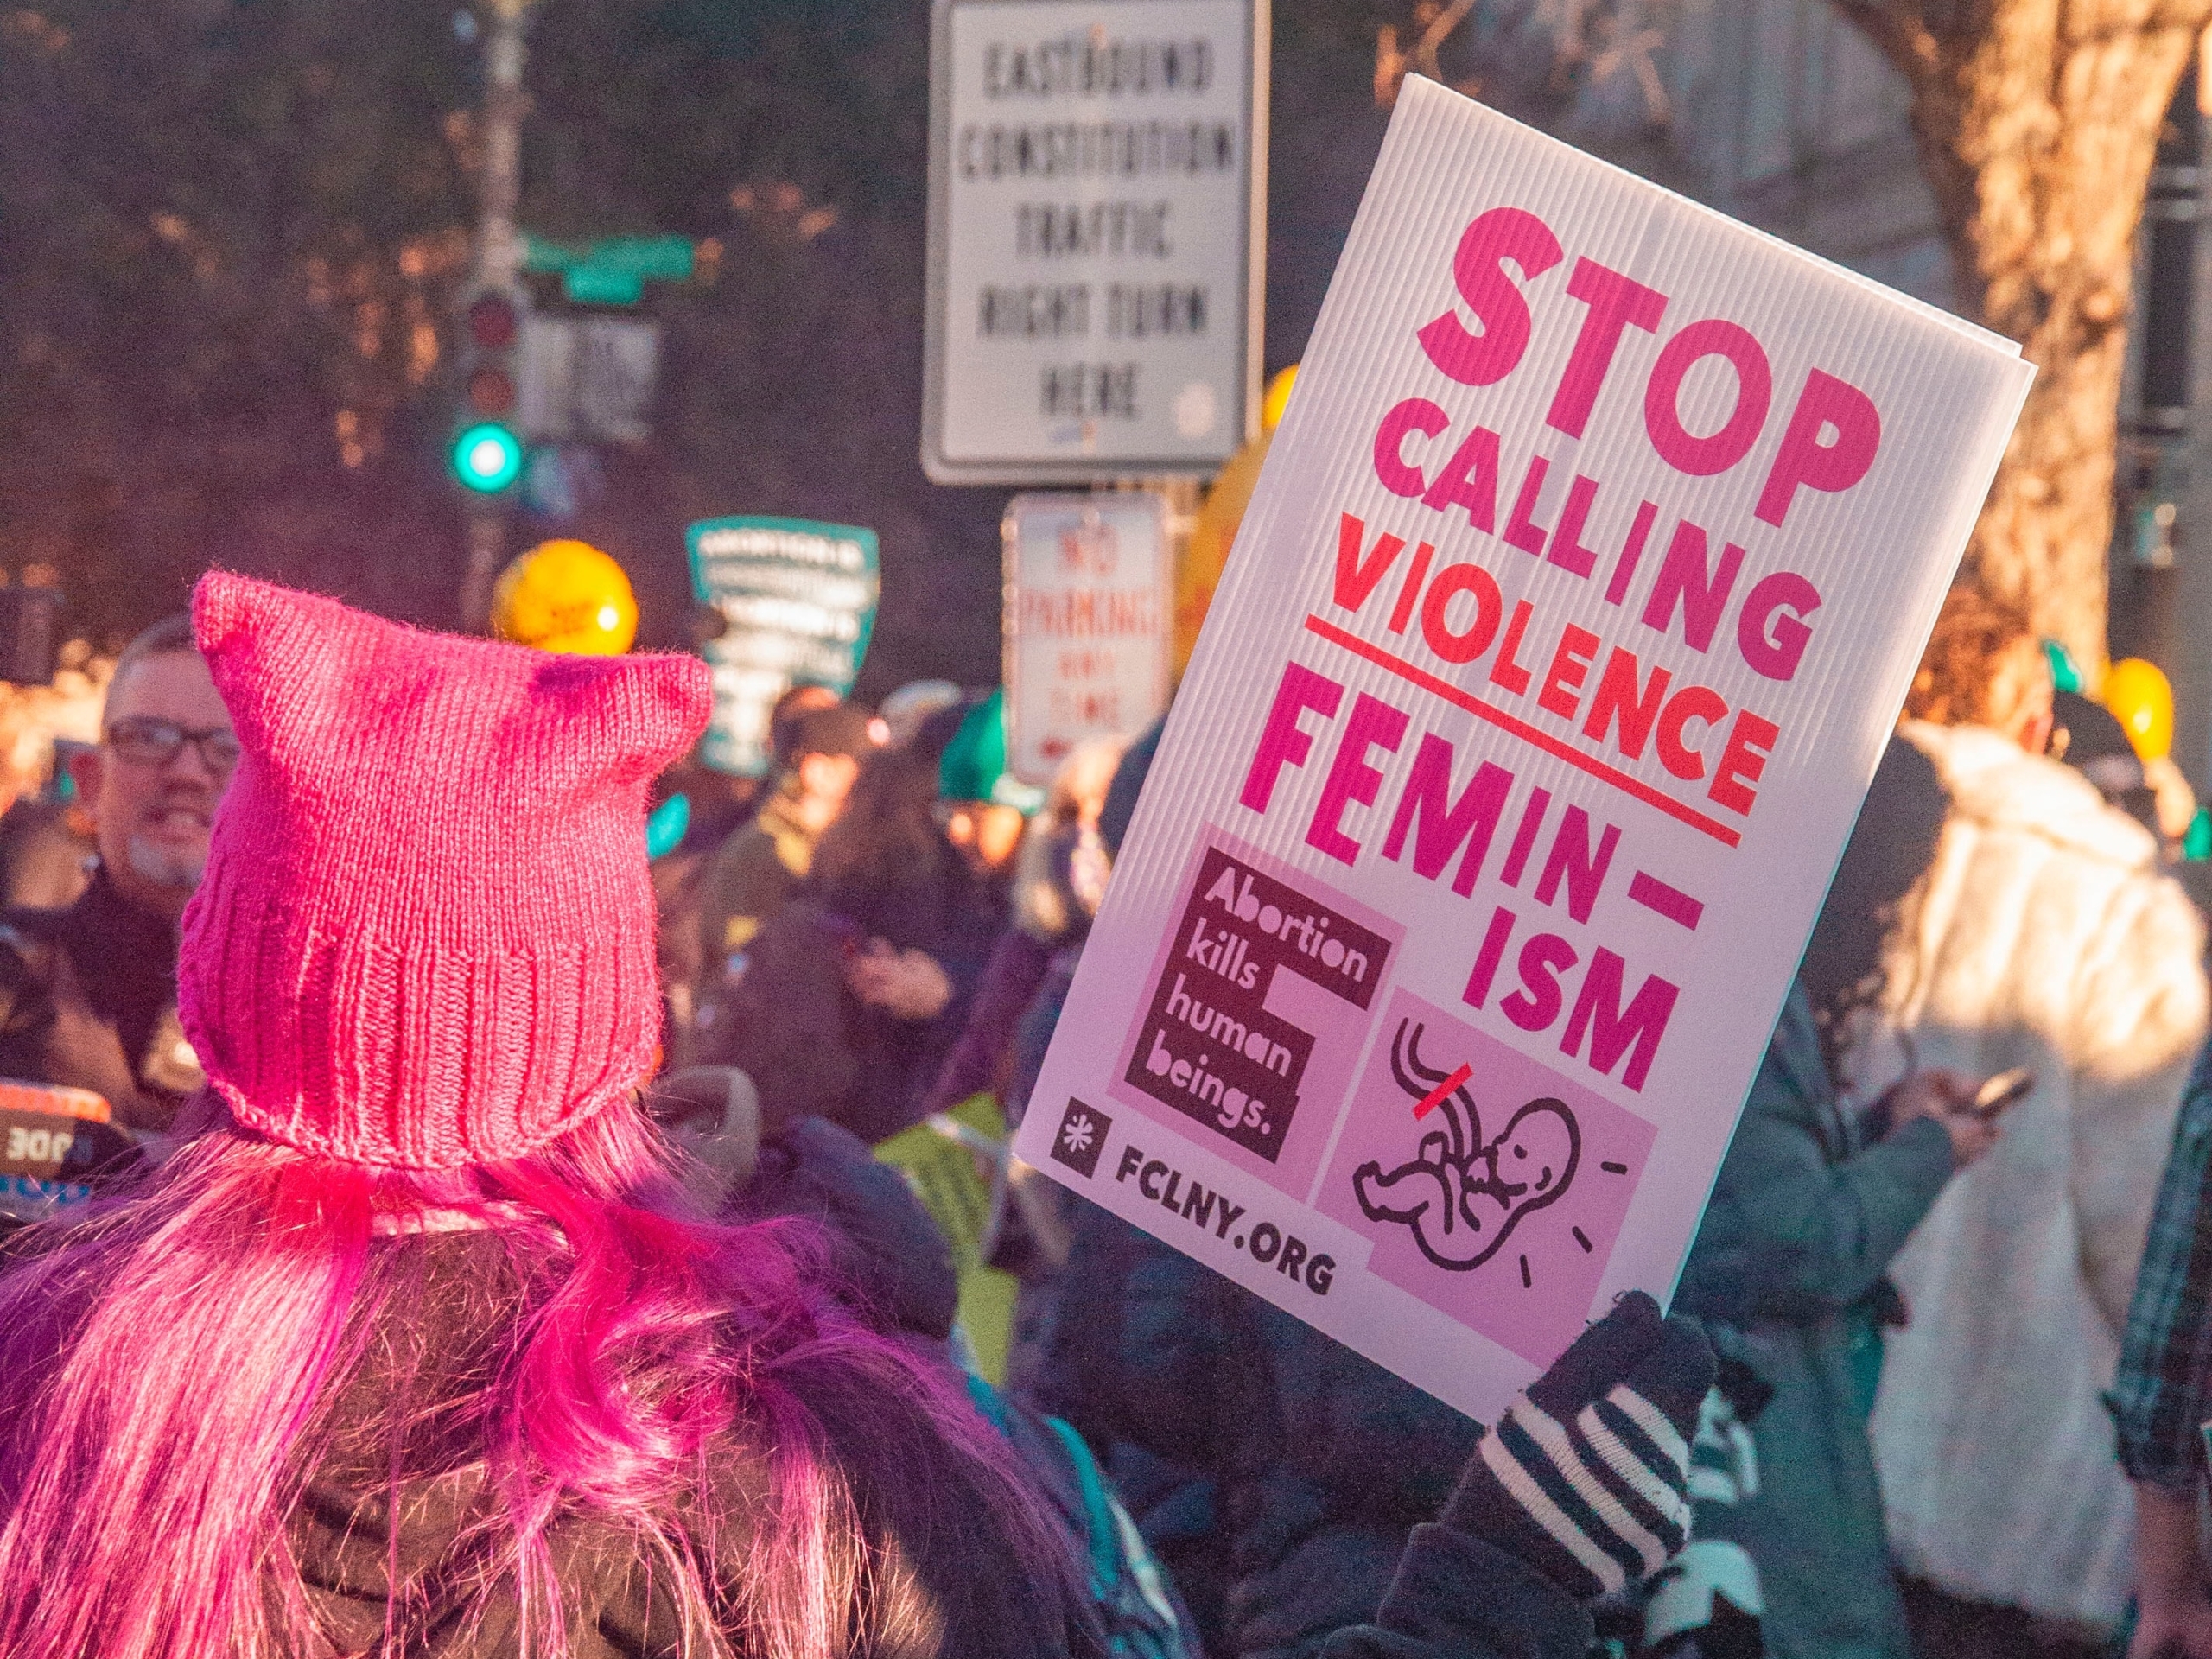 Woman wearing pink hat and holding a sign that says "Stop calling violence feminism"